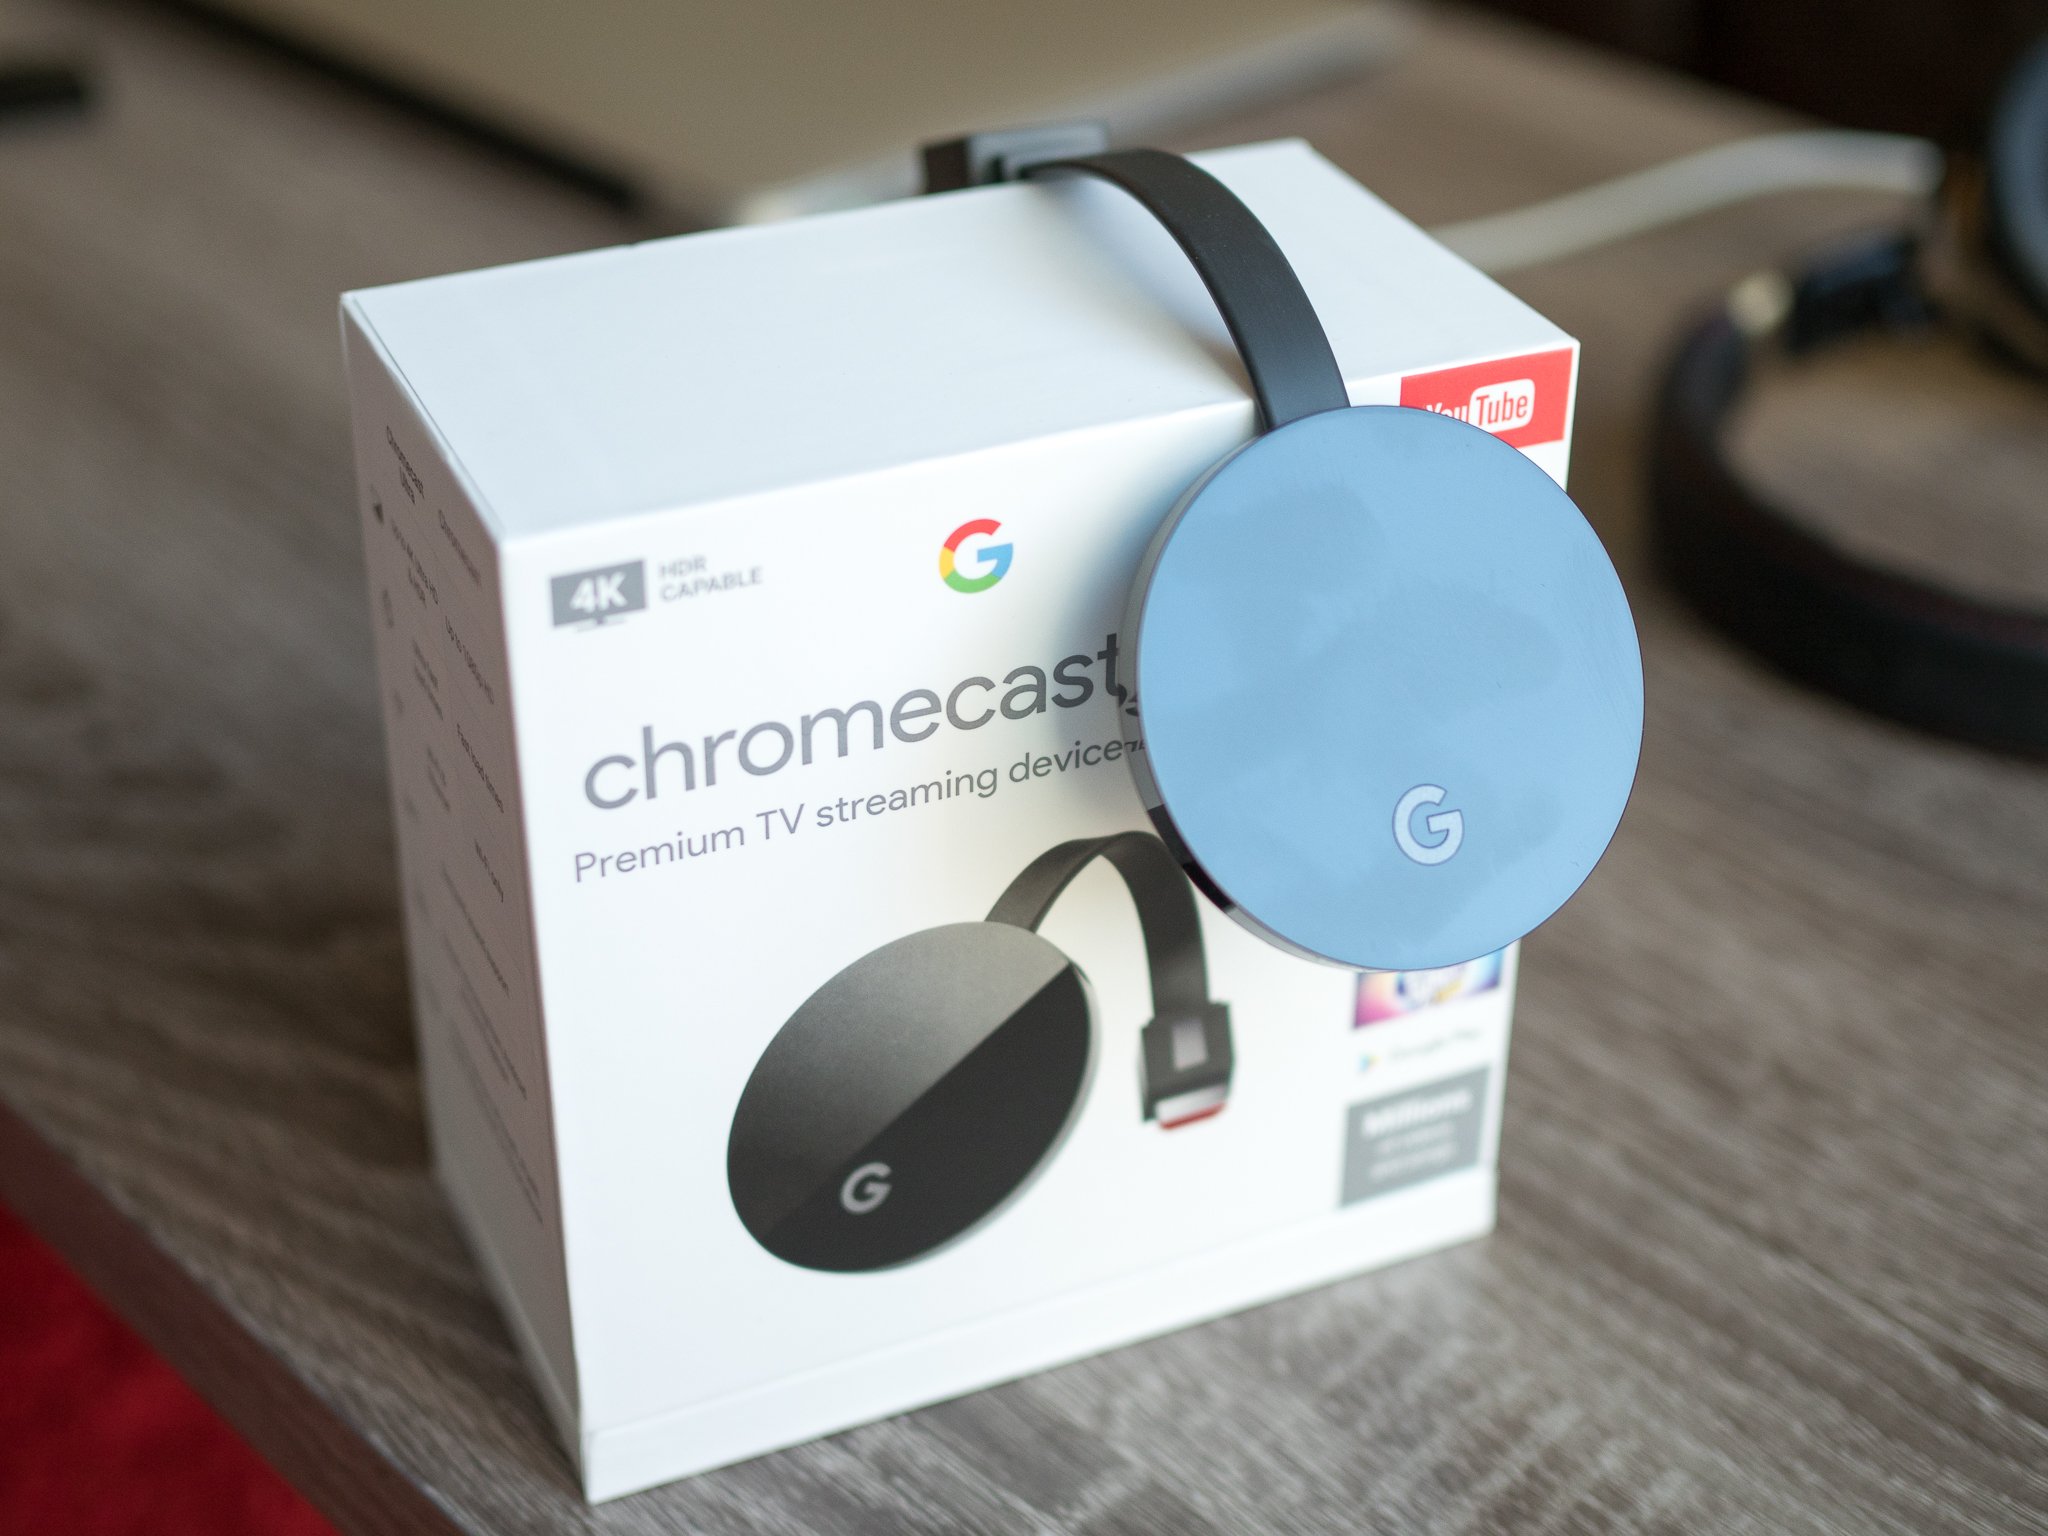 Chromecast vs. Google Cast: What's the difference? | Central